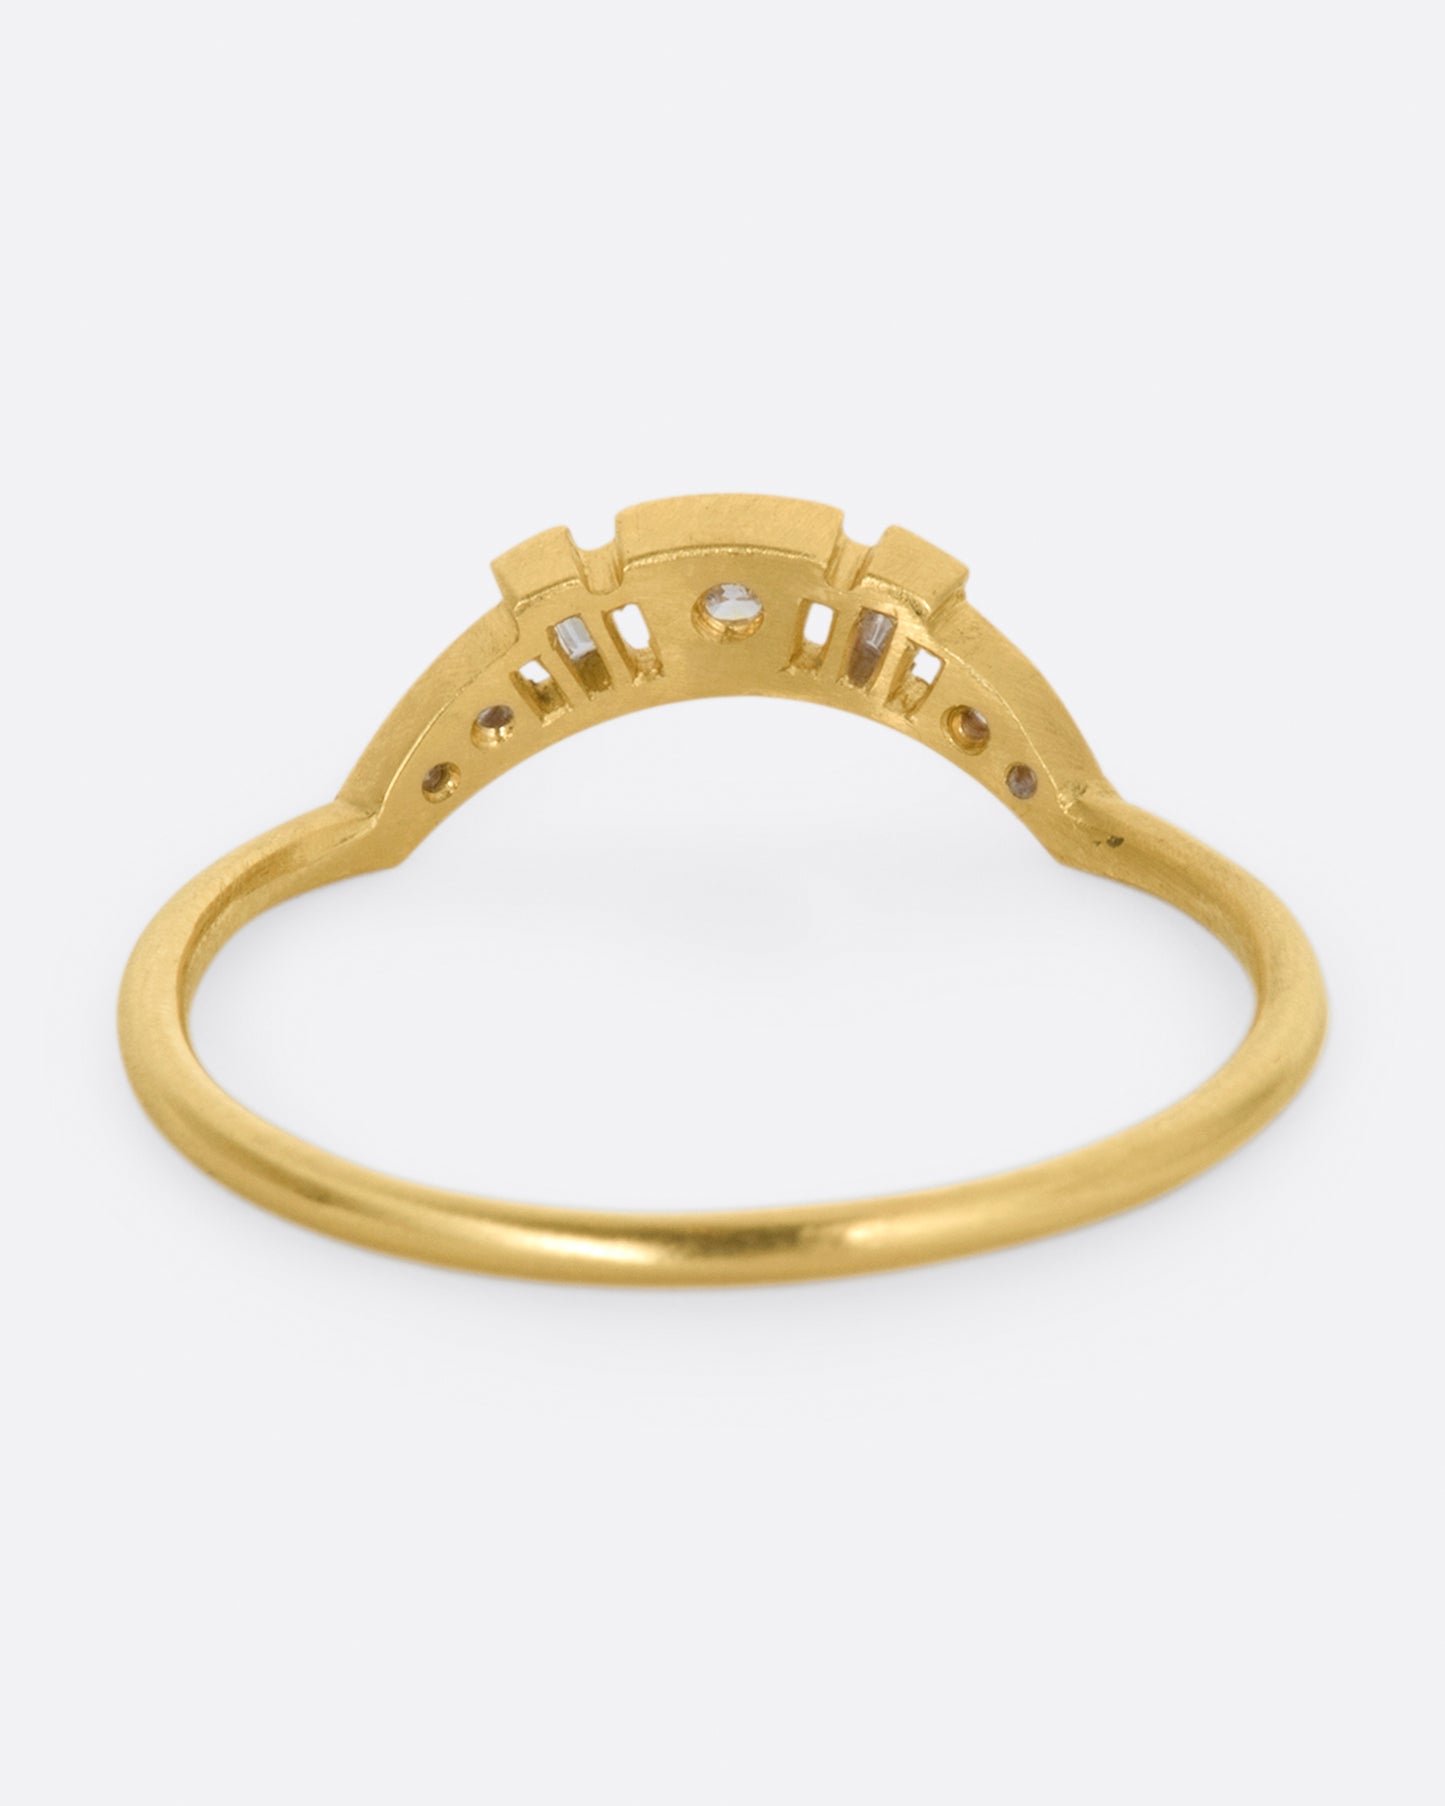 A yellow gold ring with a curved face that makes it good for stacking, dotted with round and baguette diamonds, and milgrain details - shown from the back.